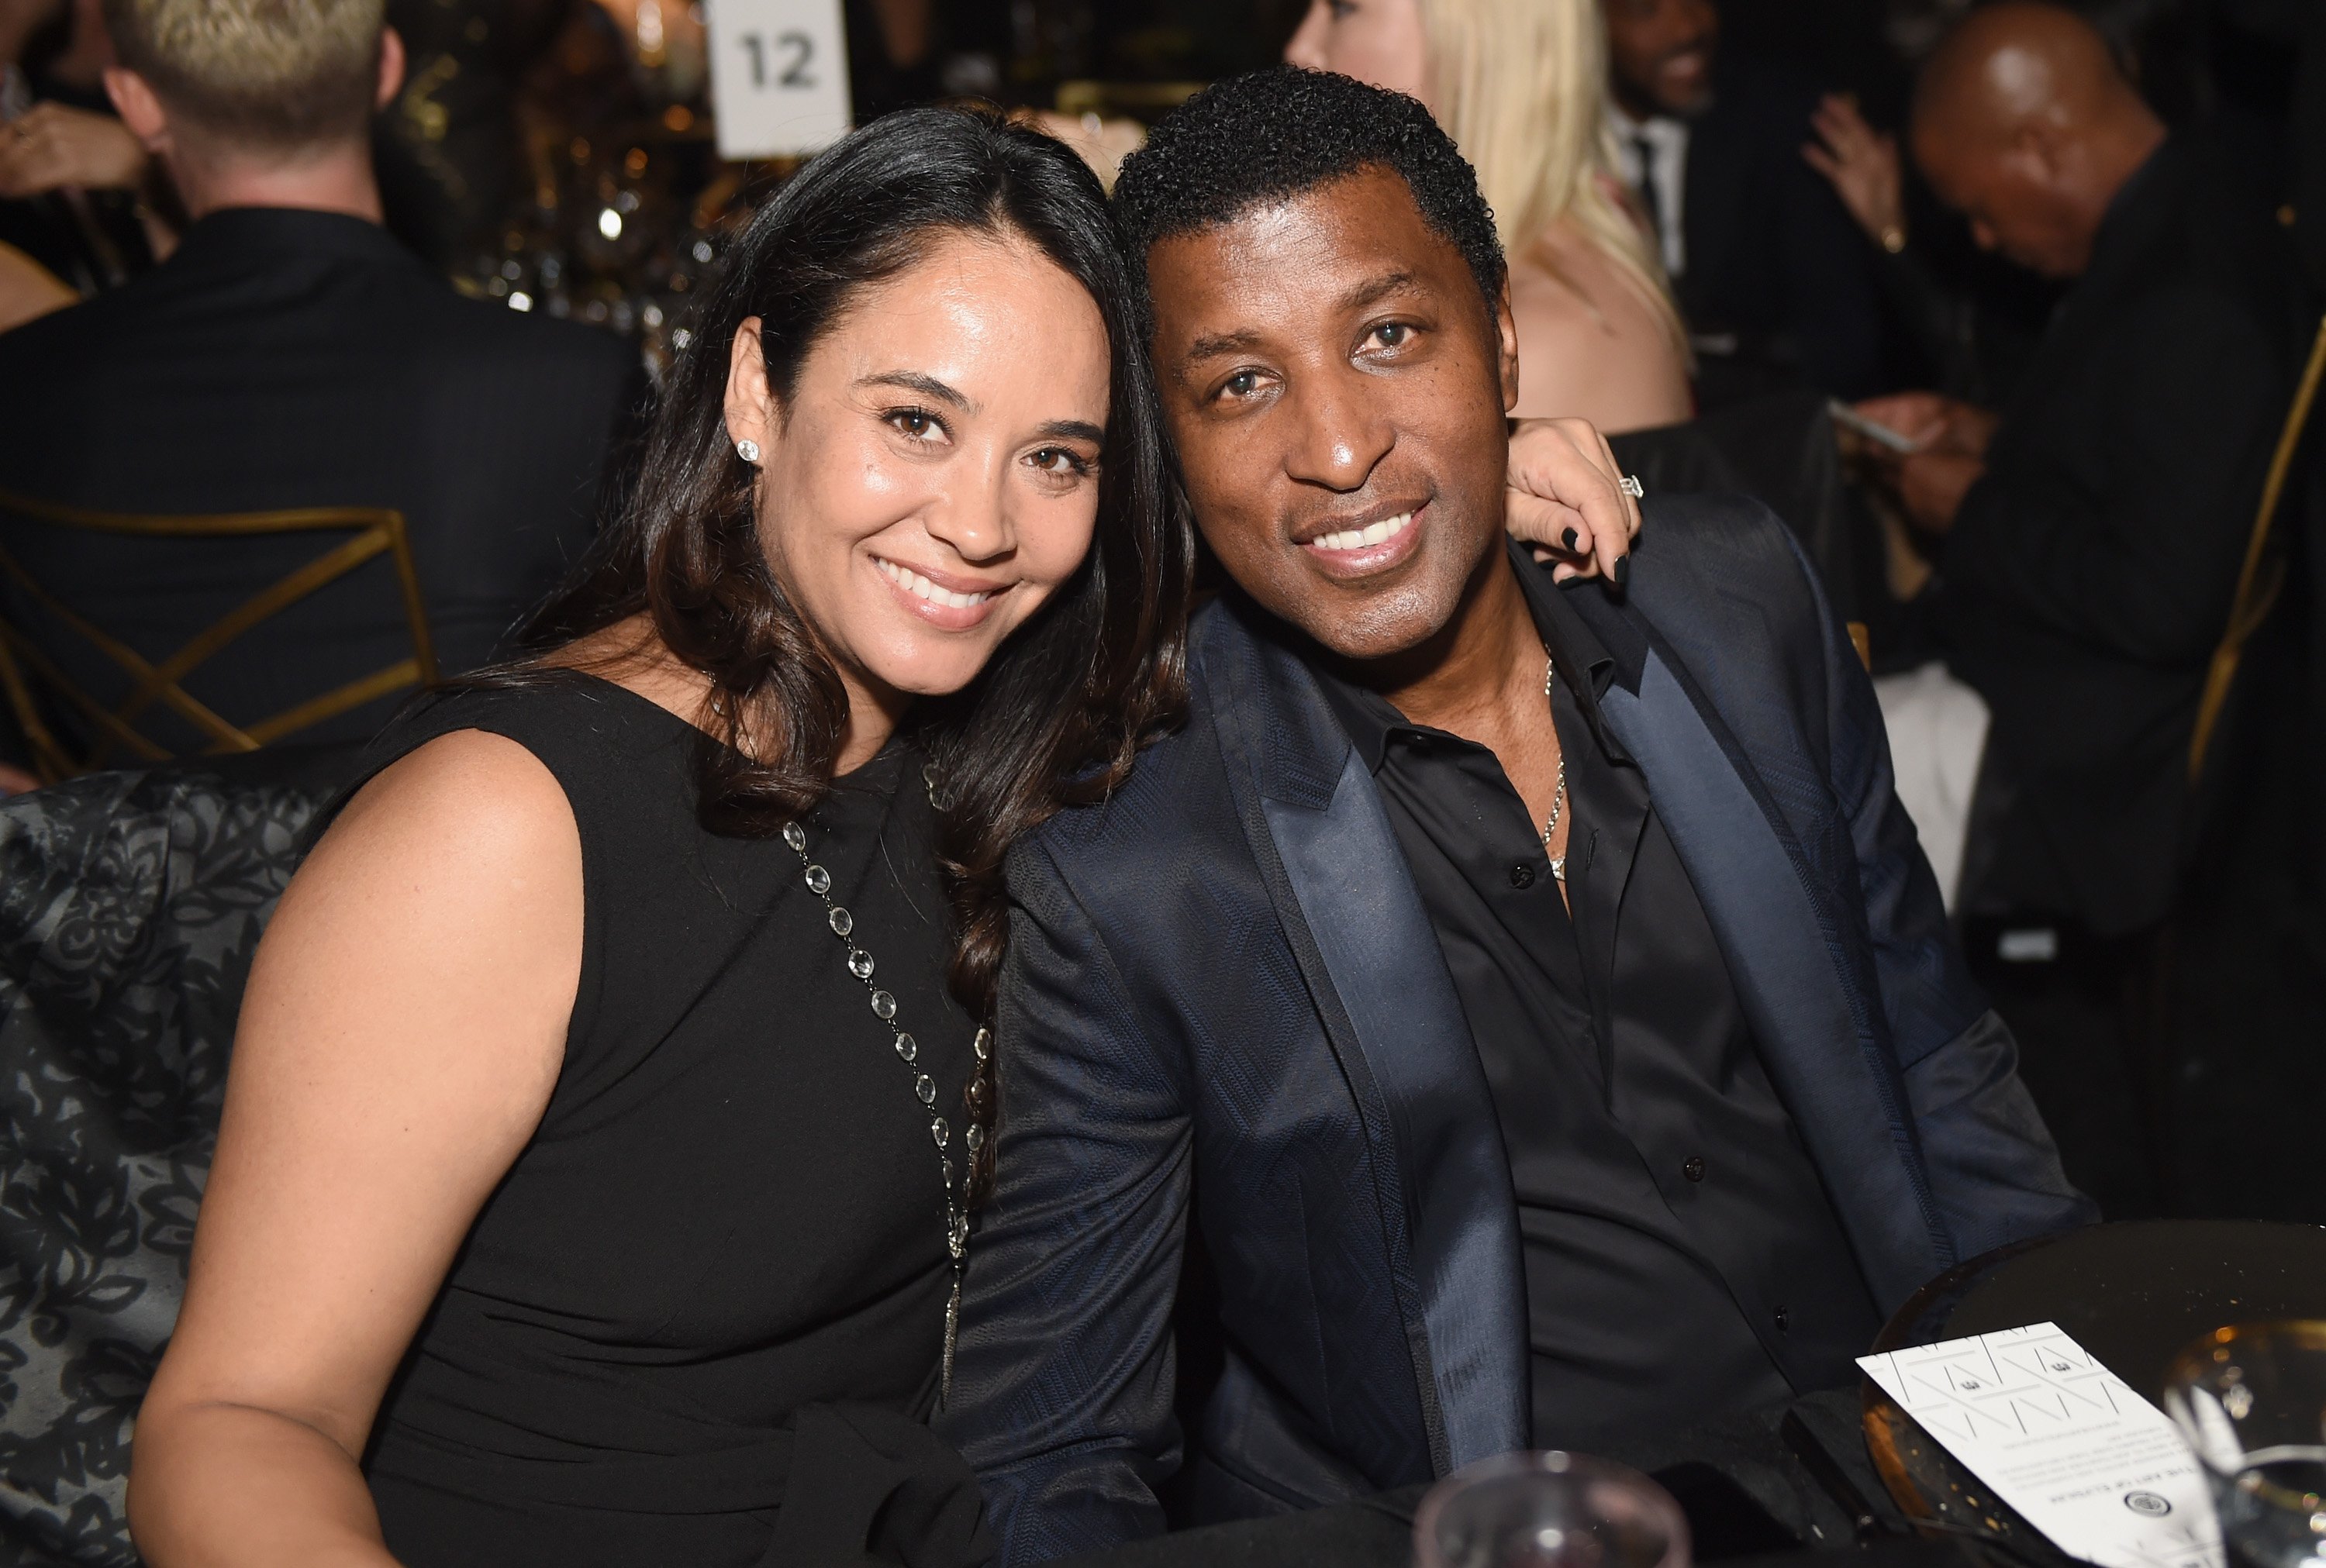 Kenny "Babyface" Edmonds with his wife, Nicole Patenburg at an event celebrating "Stevie Wonder's HEAVEN" at The Art of Elysium in January 2017. | Photo: Getty Images